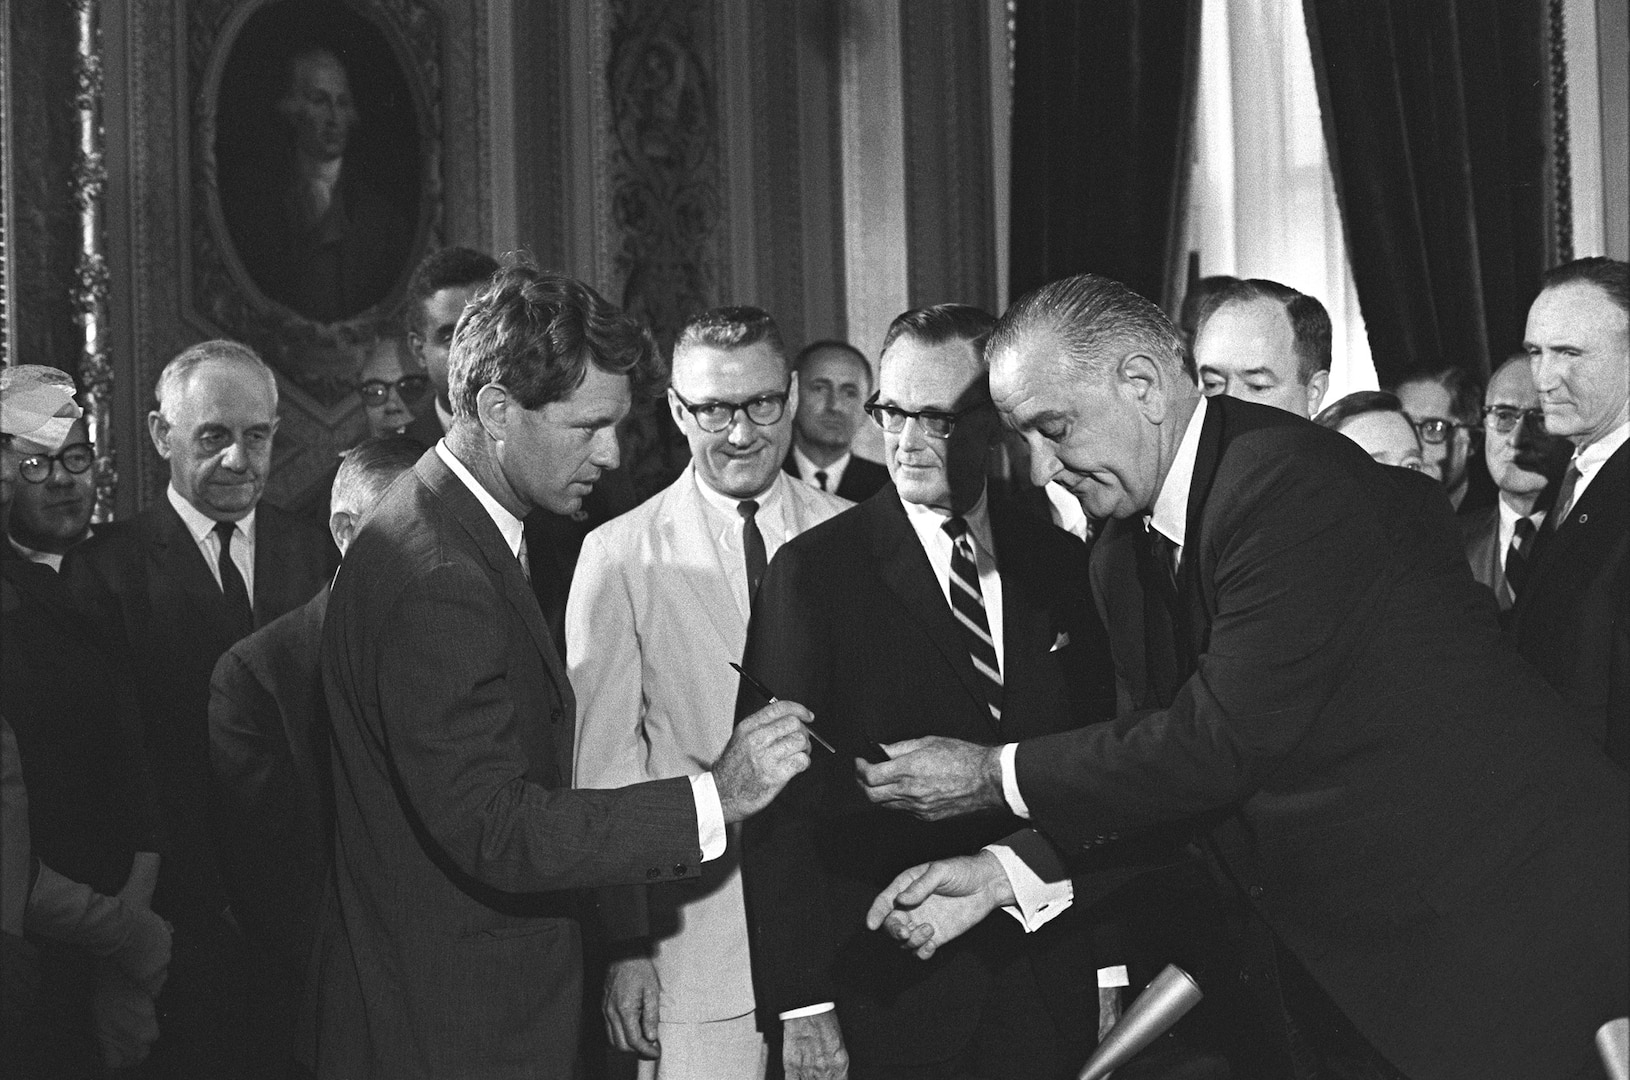 President Lyndon B. Johnson hands pen to Senator Robert F. Kennedy during signing ceremony for Voting Rights Act, U.S. Capitol, Washington, DC, August 6, 1965 (White House Photo Office/LBJ Library/Robert Knudsen)